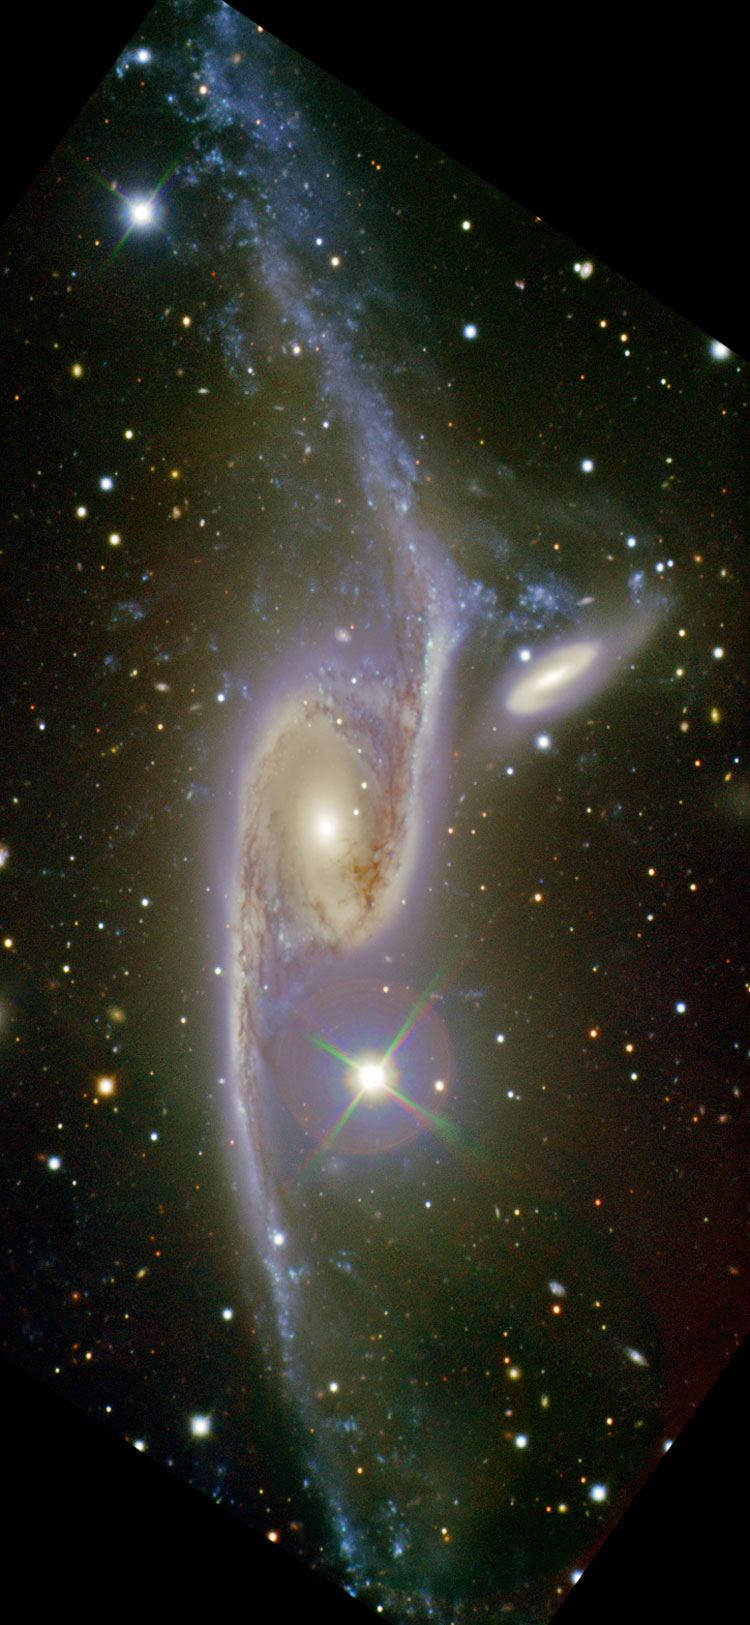 Gemini Observatory image of interacting galaxies NGC 6872 and IC 4970